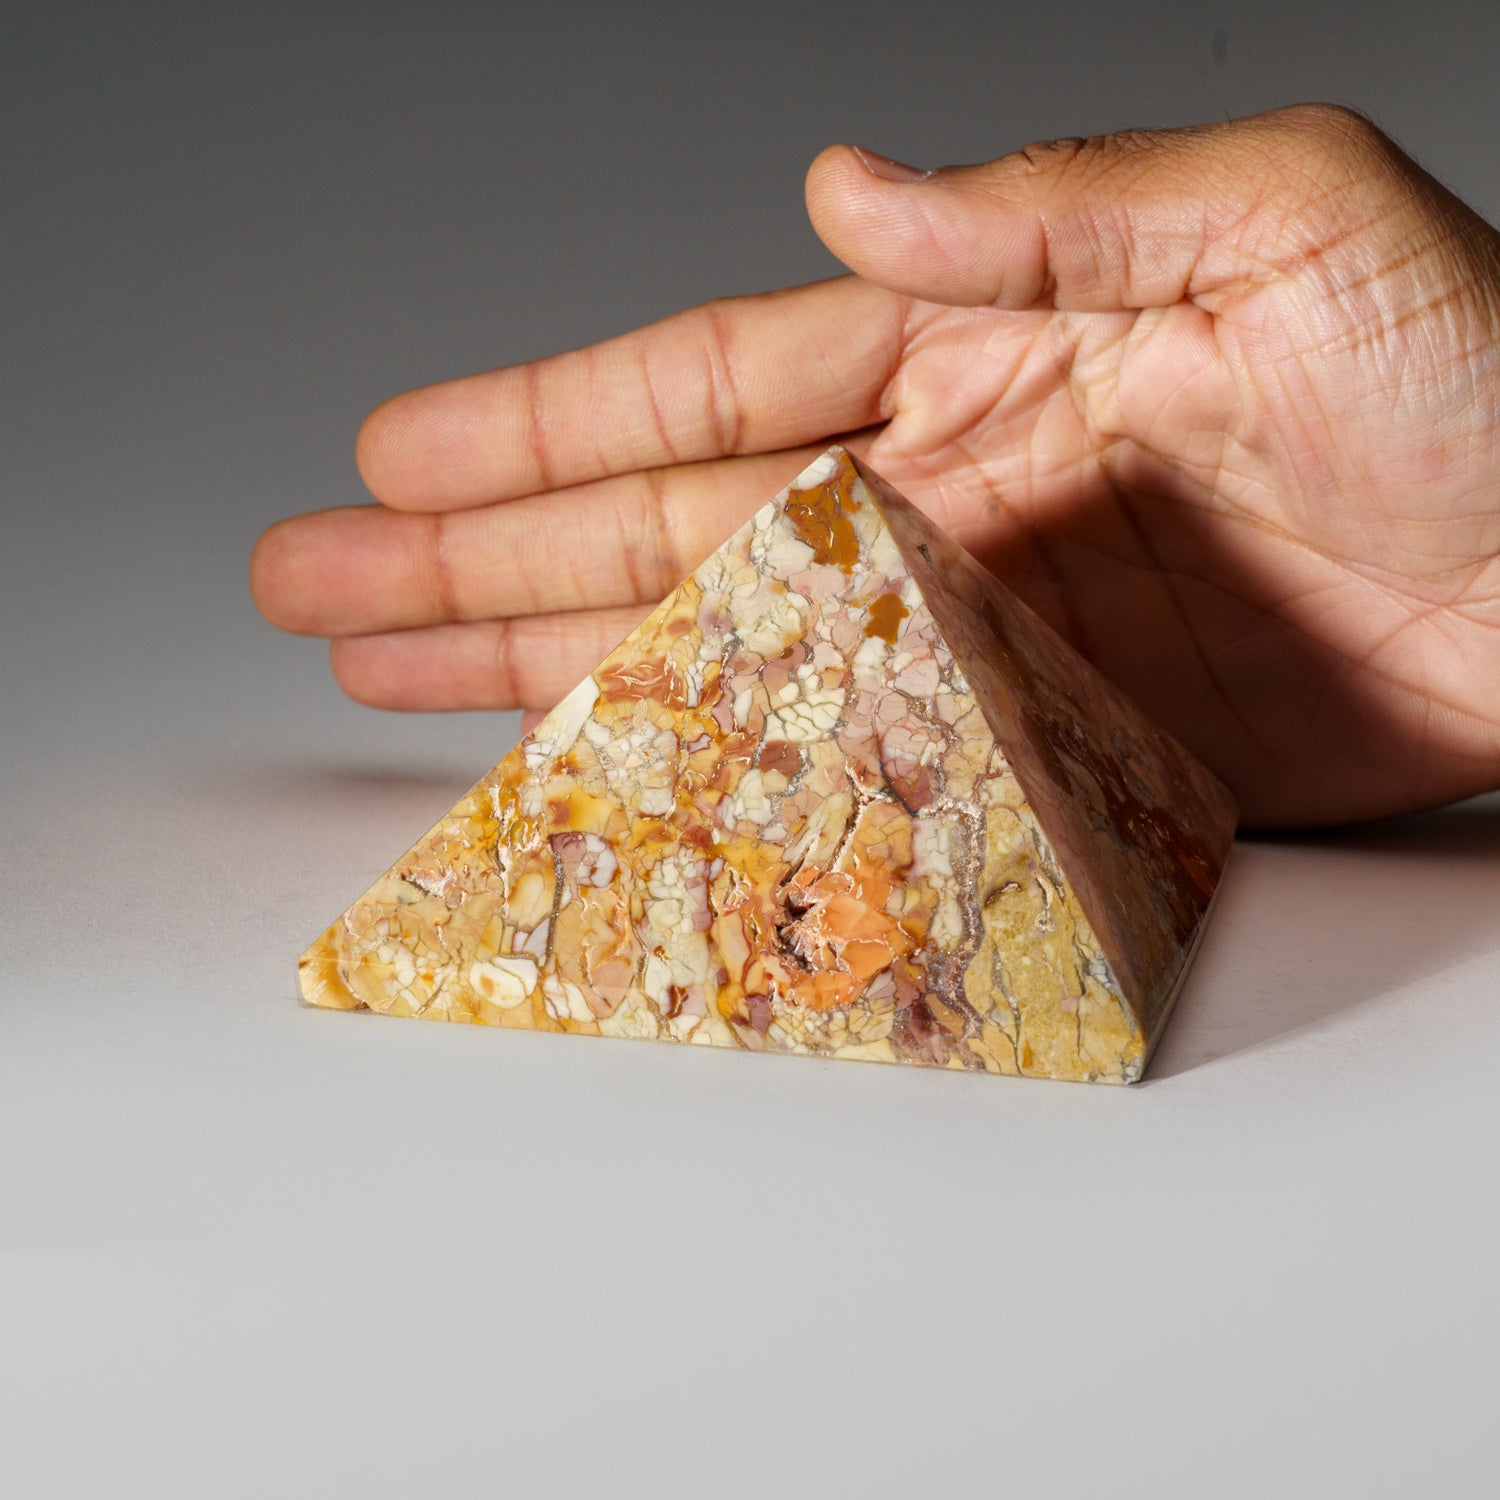 Polished Picture Jasper Pyramid from Madagascar (1.5 lbs)